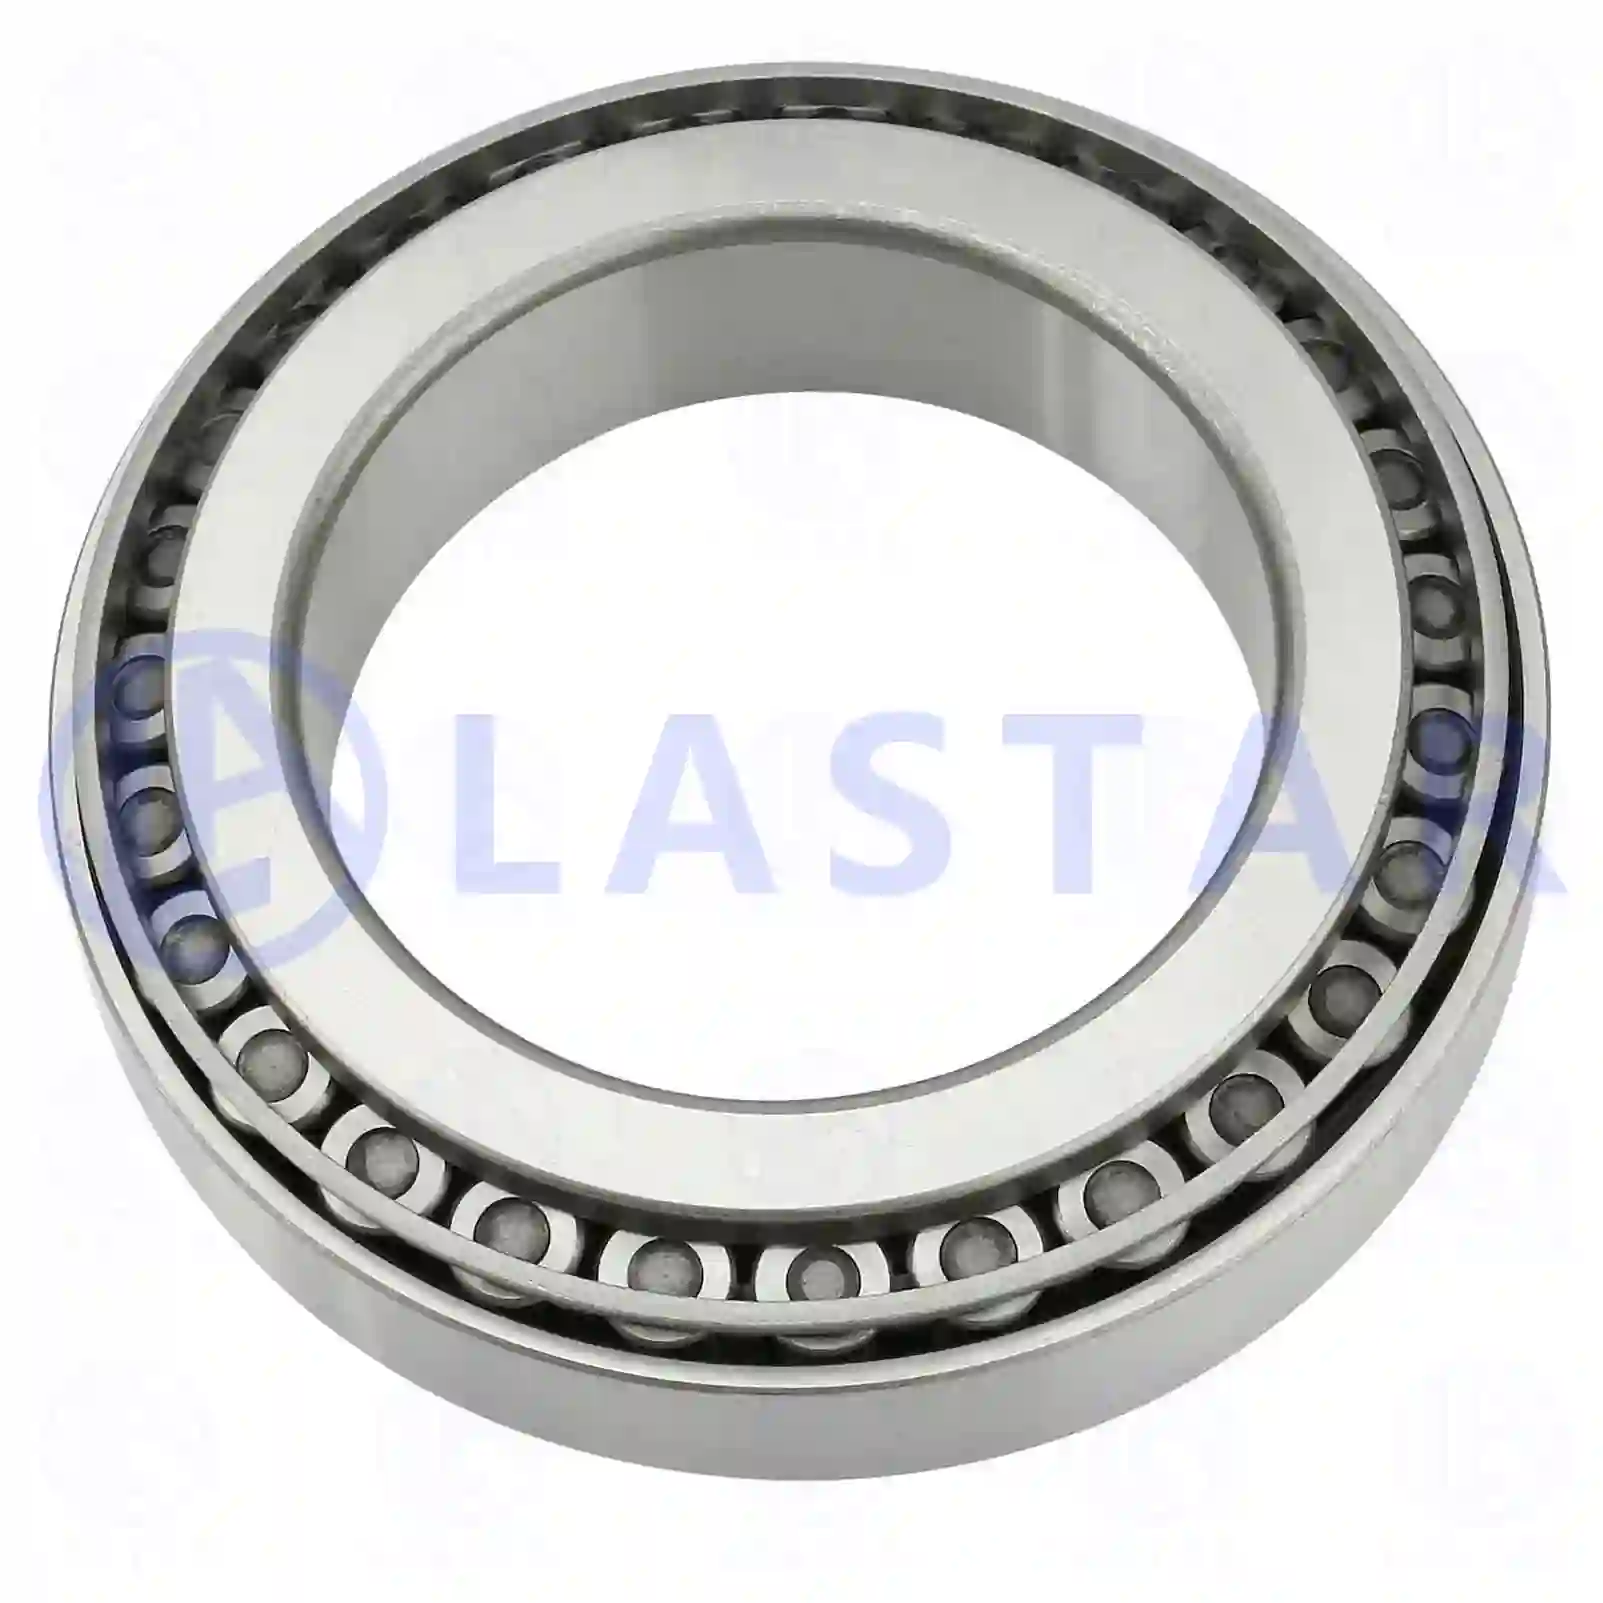 Bearings Tapered roller bearing, la no: 77724636 ,  oem no:1040270, 005090762, UNR2000010, 5000786292, 7401524061, 1301682, 1400270, 326826, 1524061, ZG02972-0008 Lastar Spare Part | Truck Spare Parts, Auotomotive Spare Parts